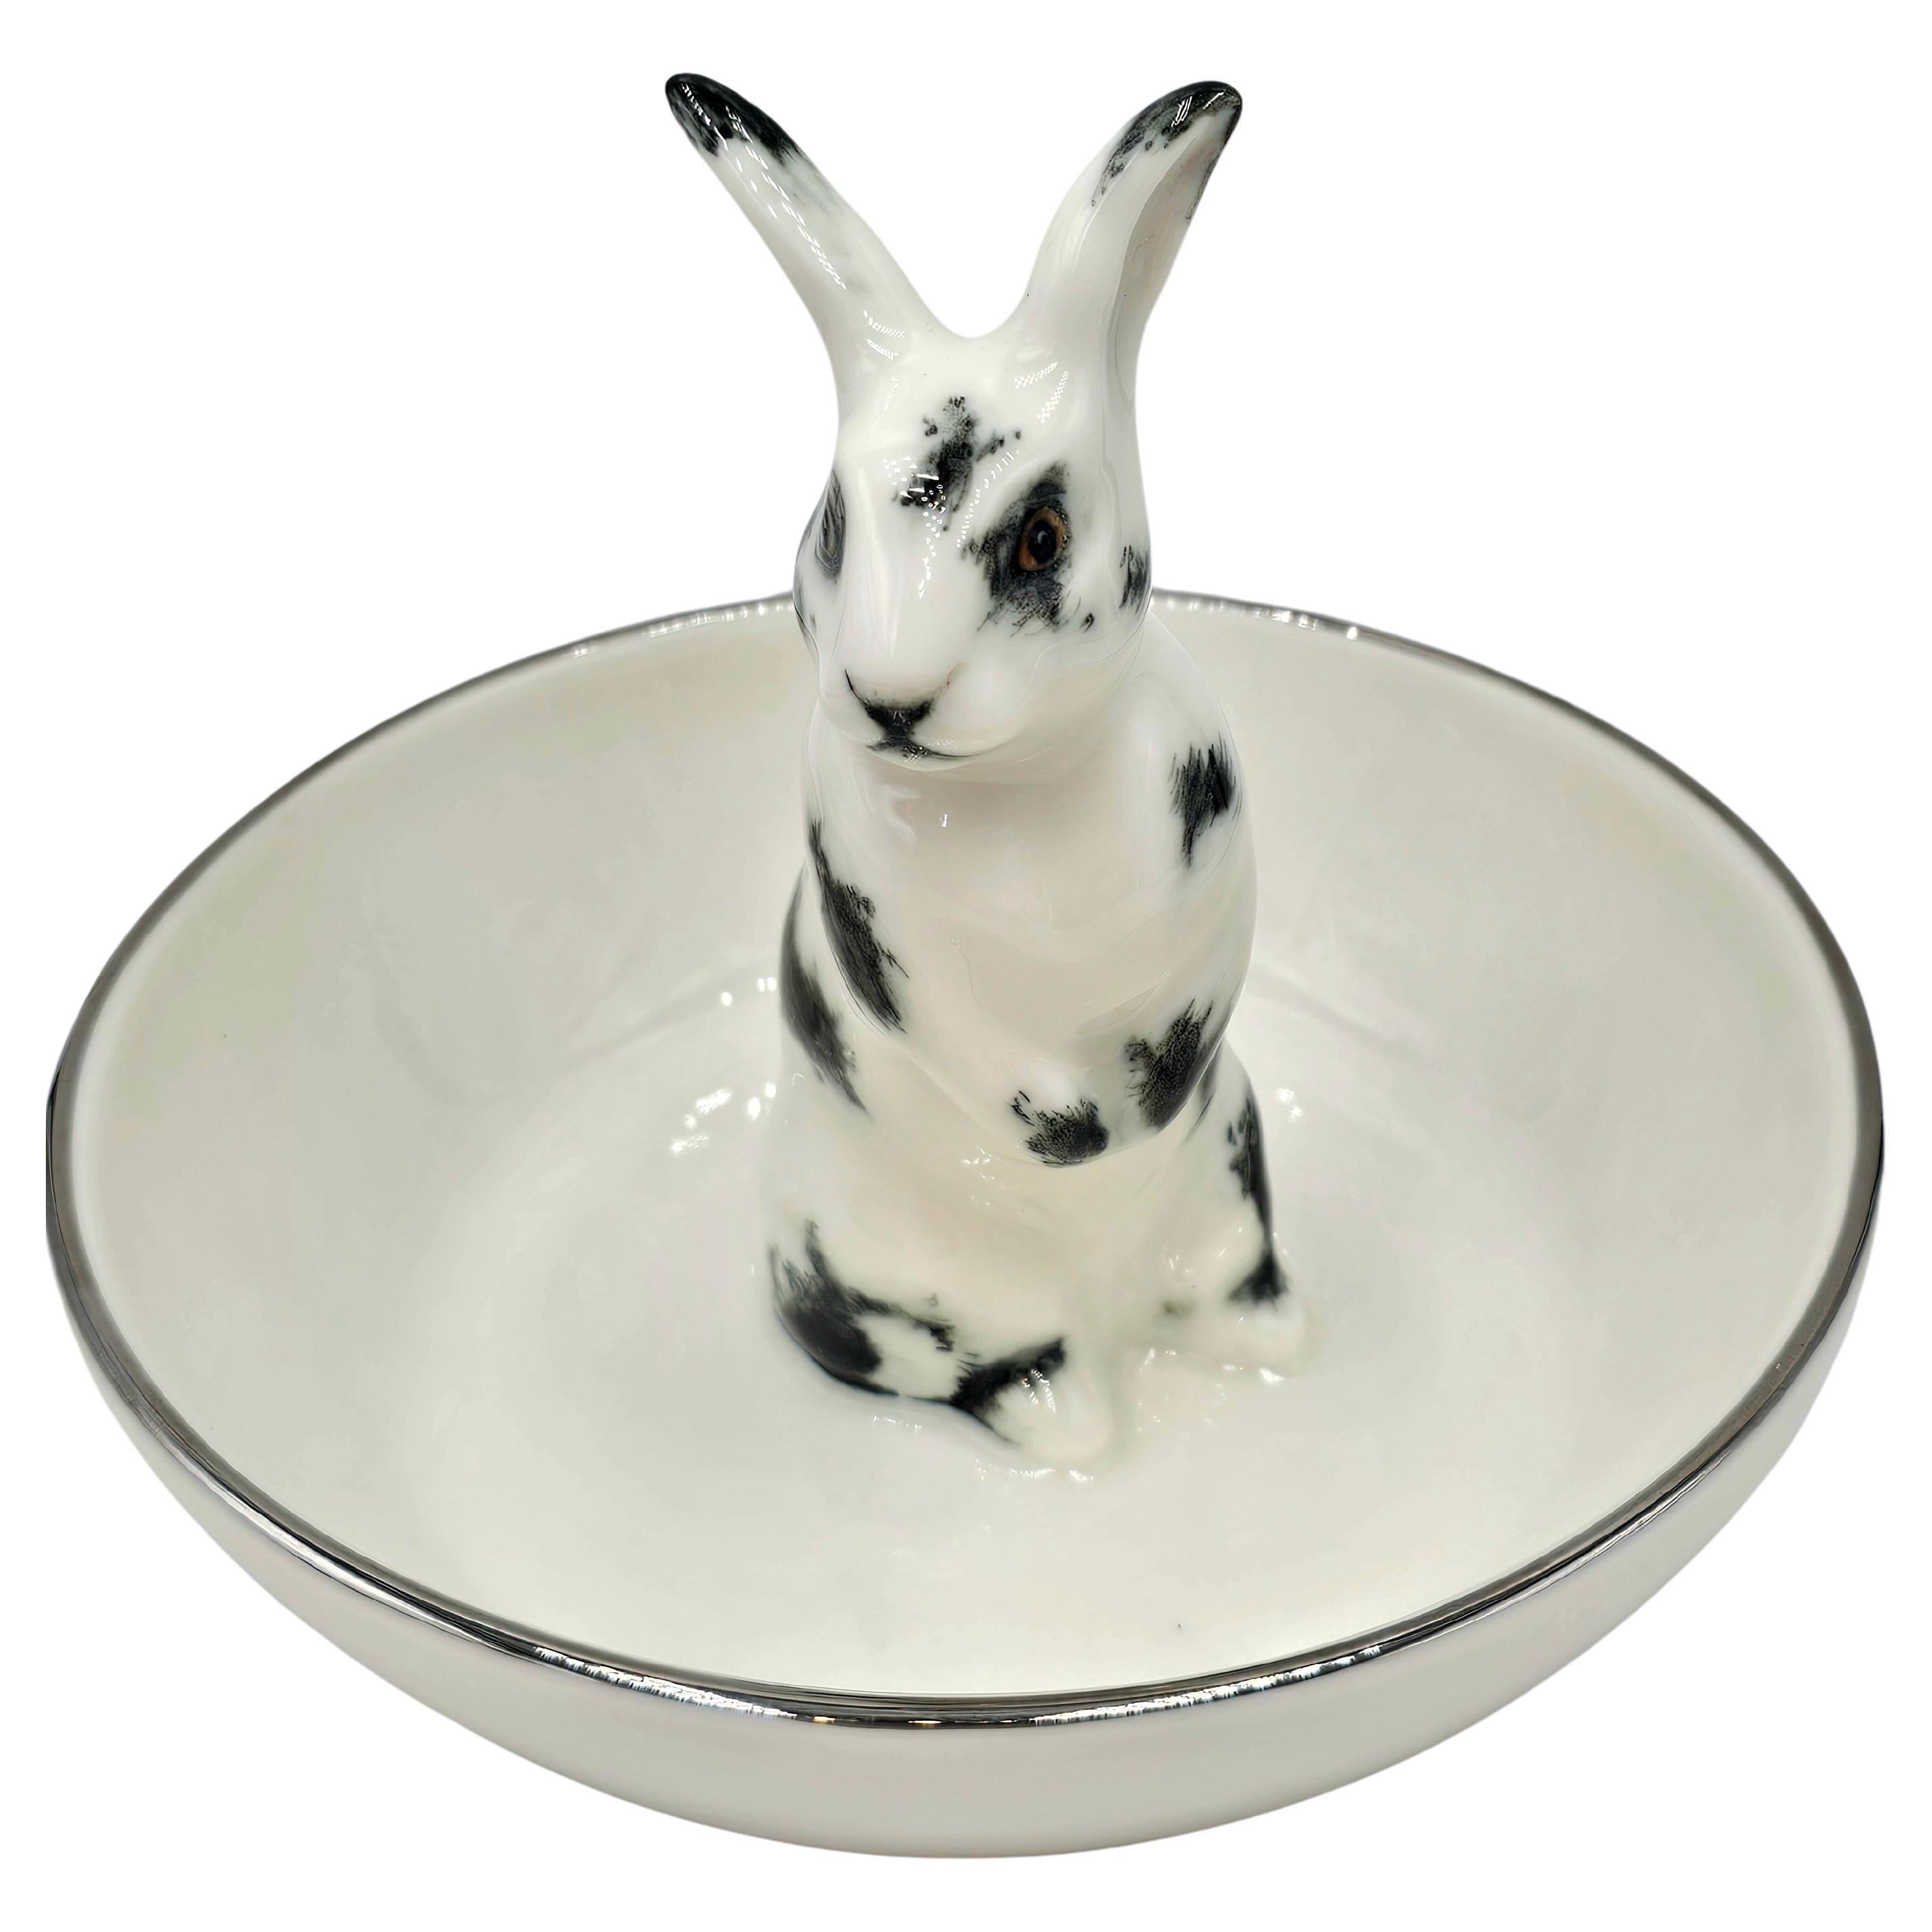 Country Style Easter Bowl Porcelain with Hare Figure Sofina Boutique Kitzbuehel For Sale